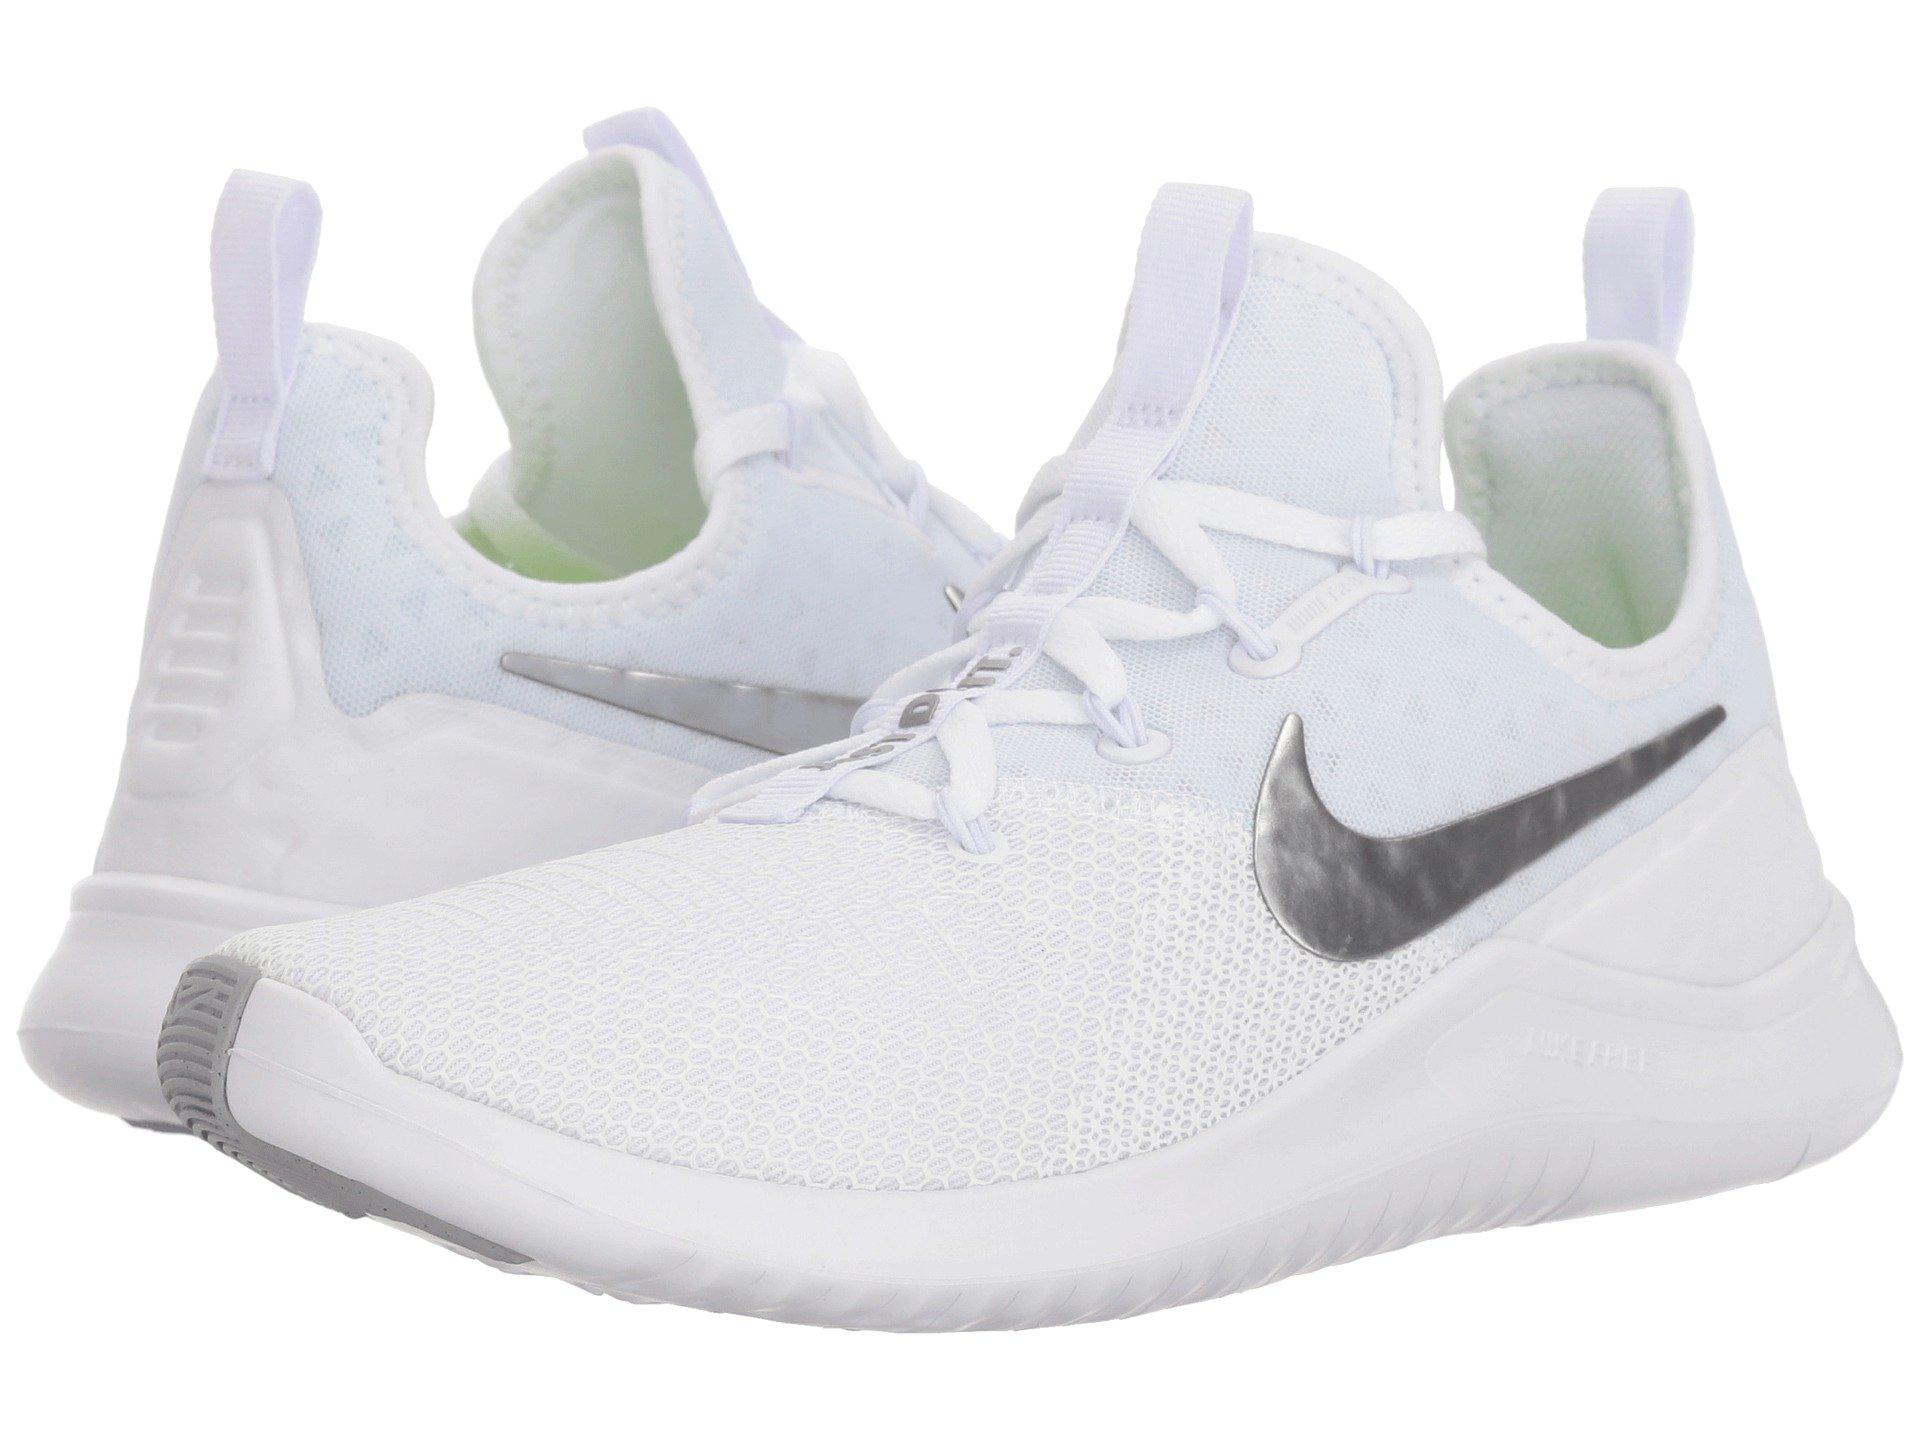 Karriere tendens betale sig Nike Free Tr 8 (pure Platinum/white/igloo) Women's Cross Training Shoes |  Lyst